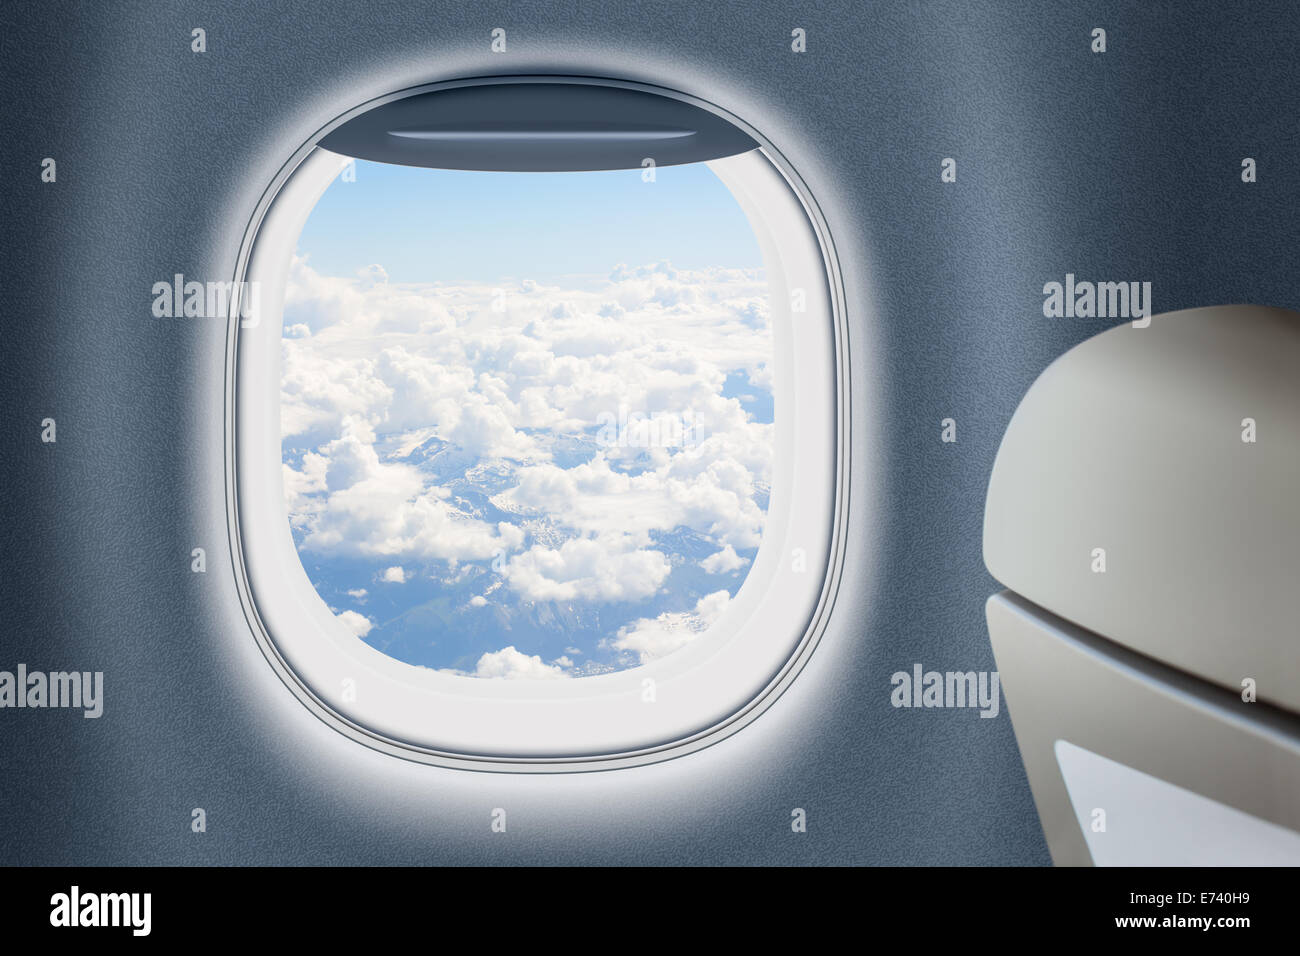 Aeroplane or jet window with clouds behind, traveling concept. Stock Photo